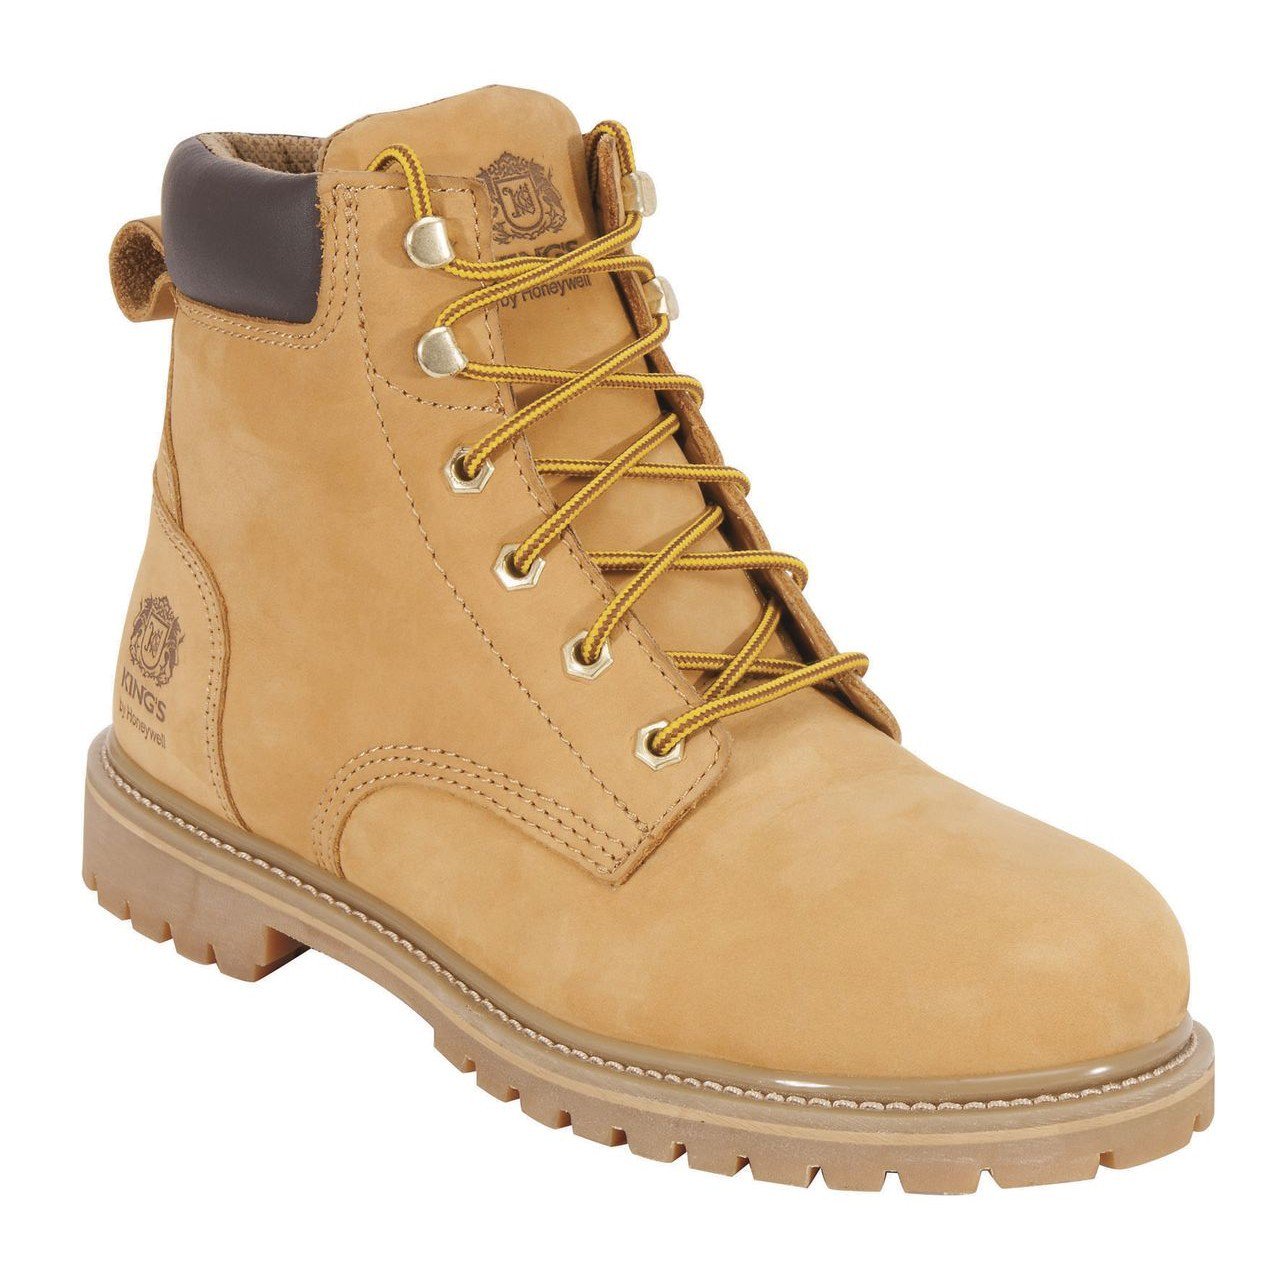 honeywell safety boots